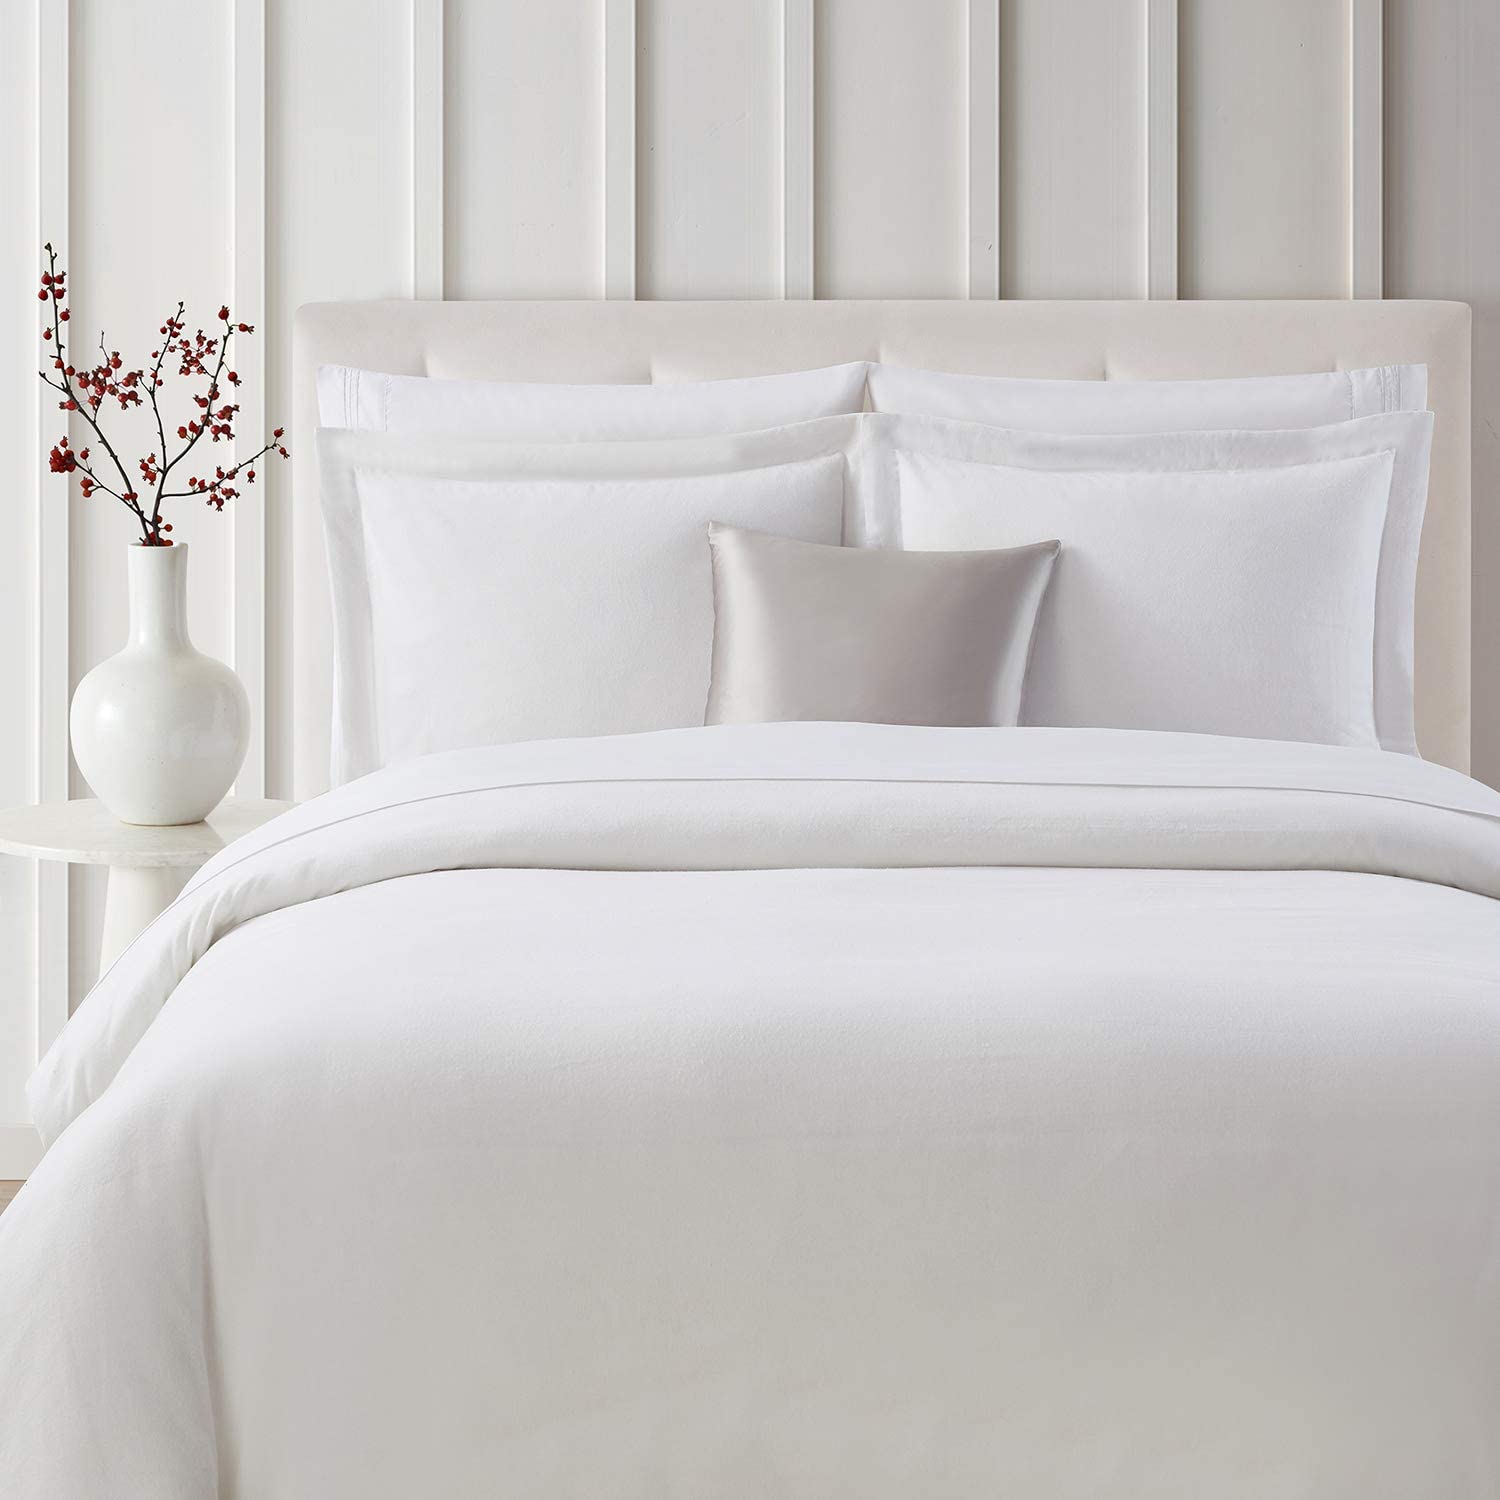 Price:$34.97  Duvet Cover Twin Set 3pcs - Soft 100% Organic Cotton Flannel Bedding, 1 Sham and 1 Comforter Cover - Button Closure and Corner Ties (Twin/Twin XL, Flannel White)